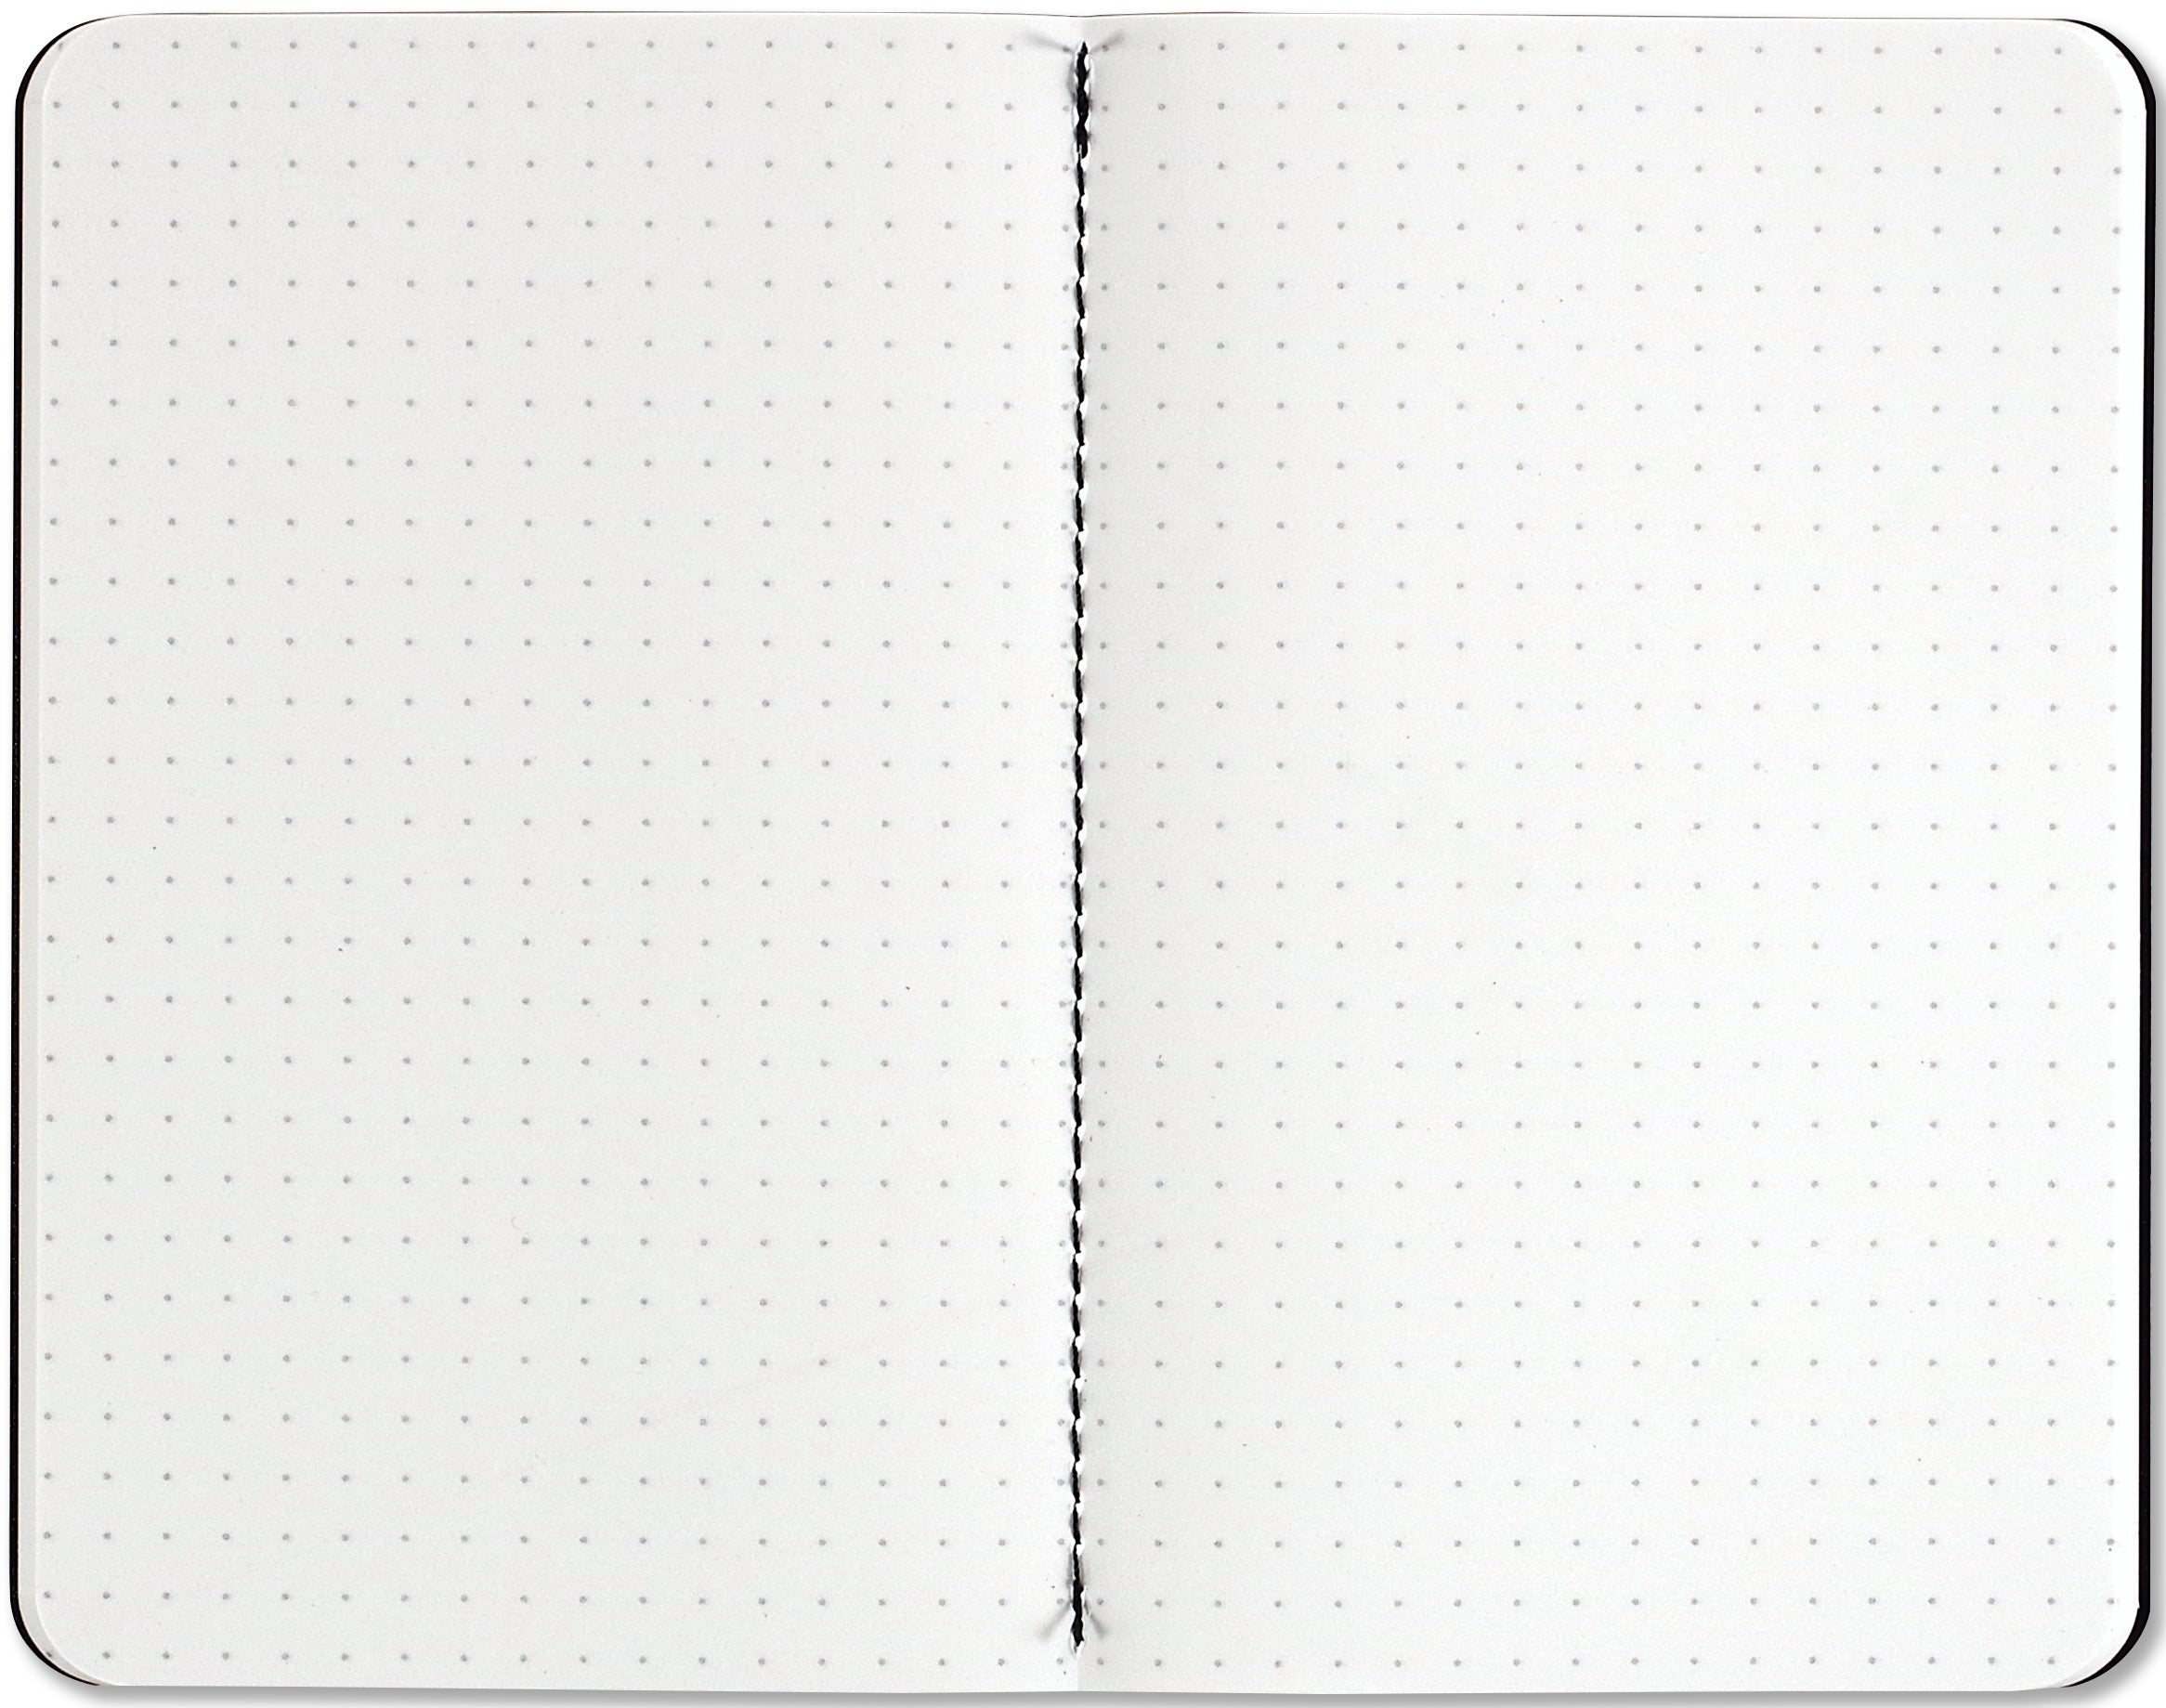 All Terrain Notebooks - Set of 3 Durable, Portable and Waterproof Dot Grid Journals    